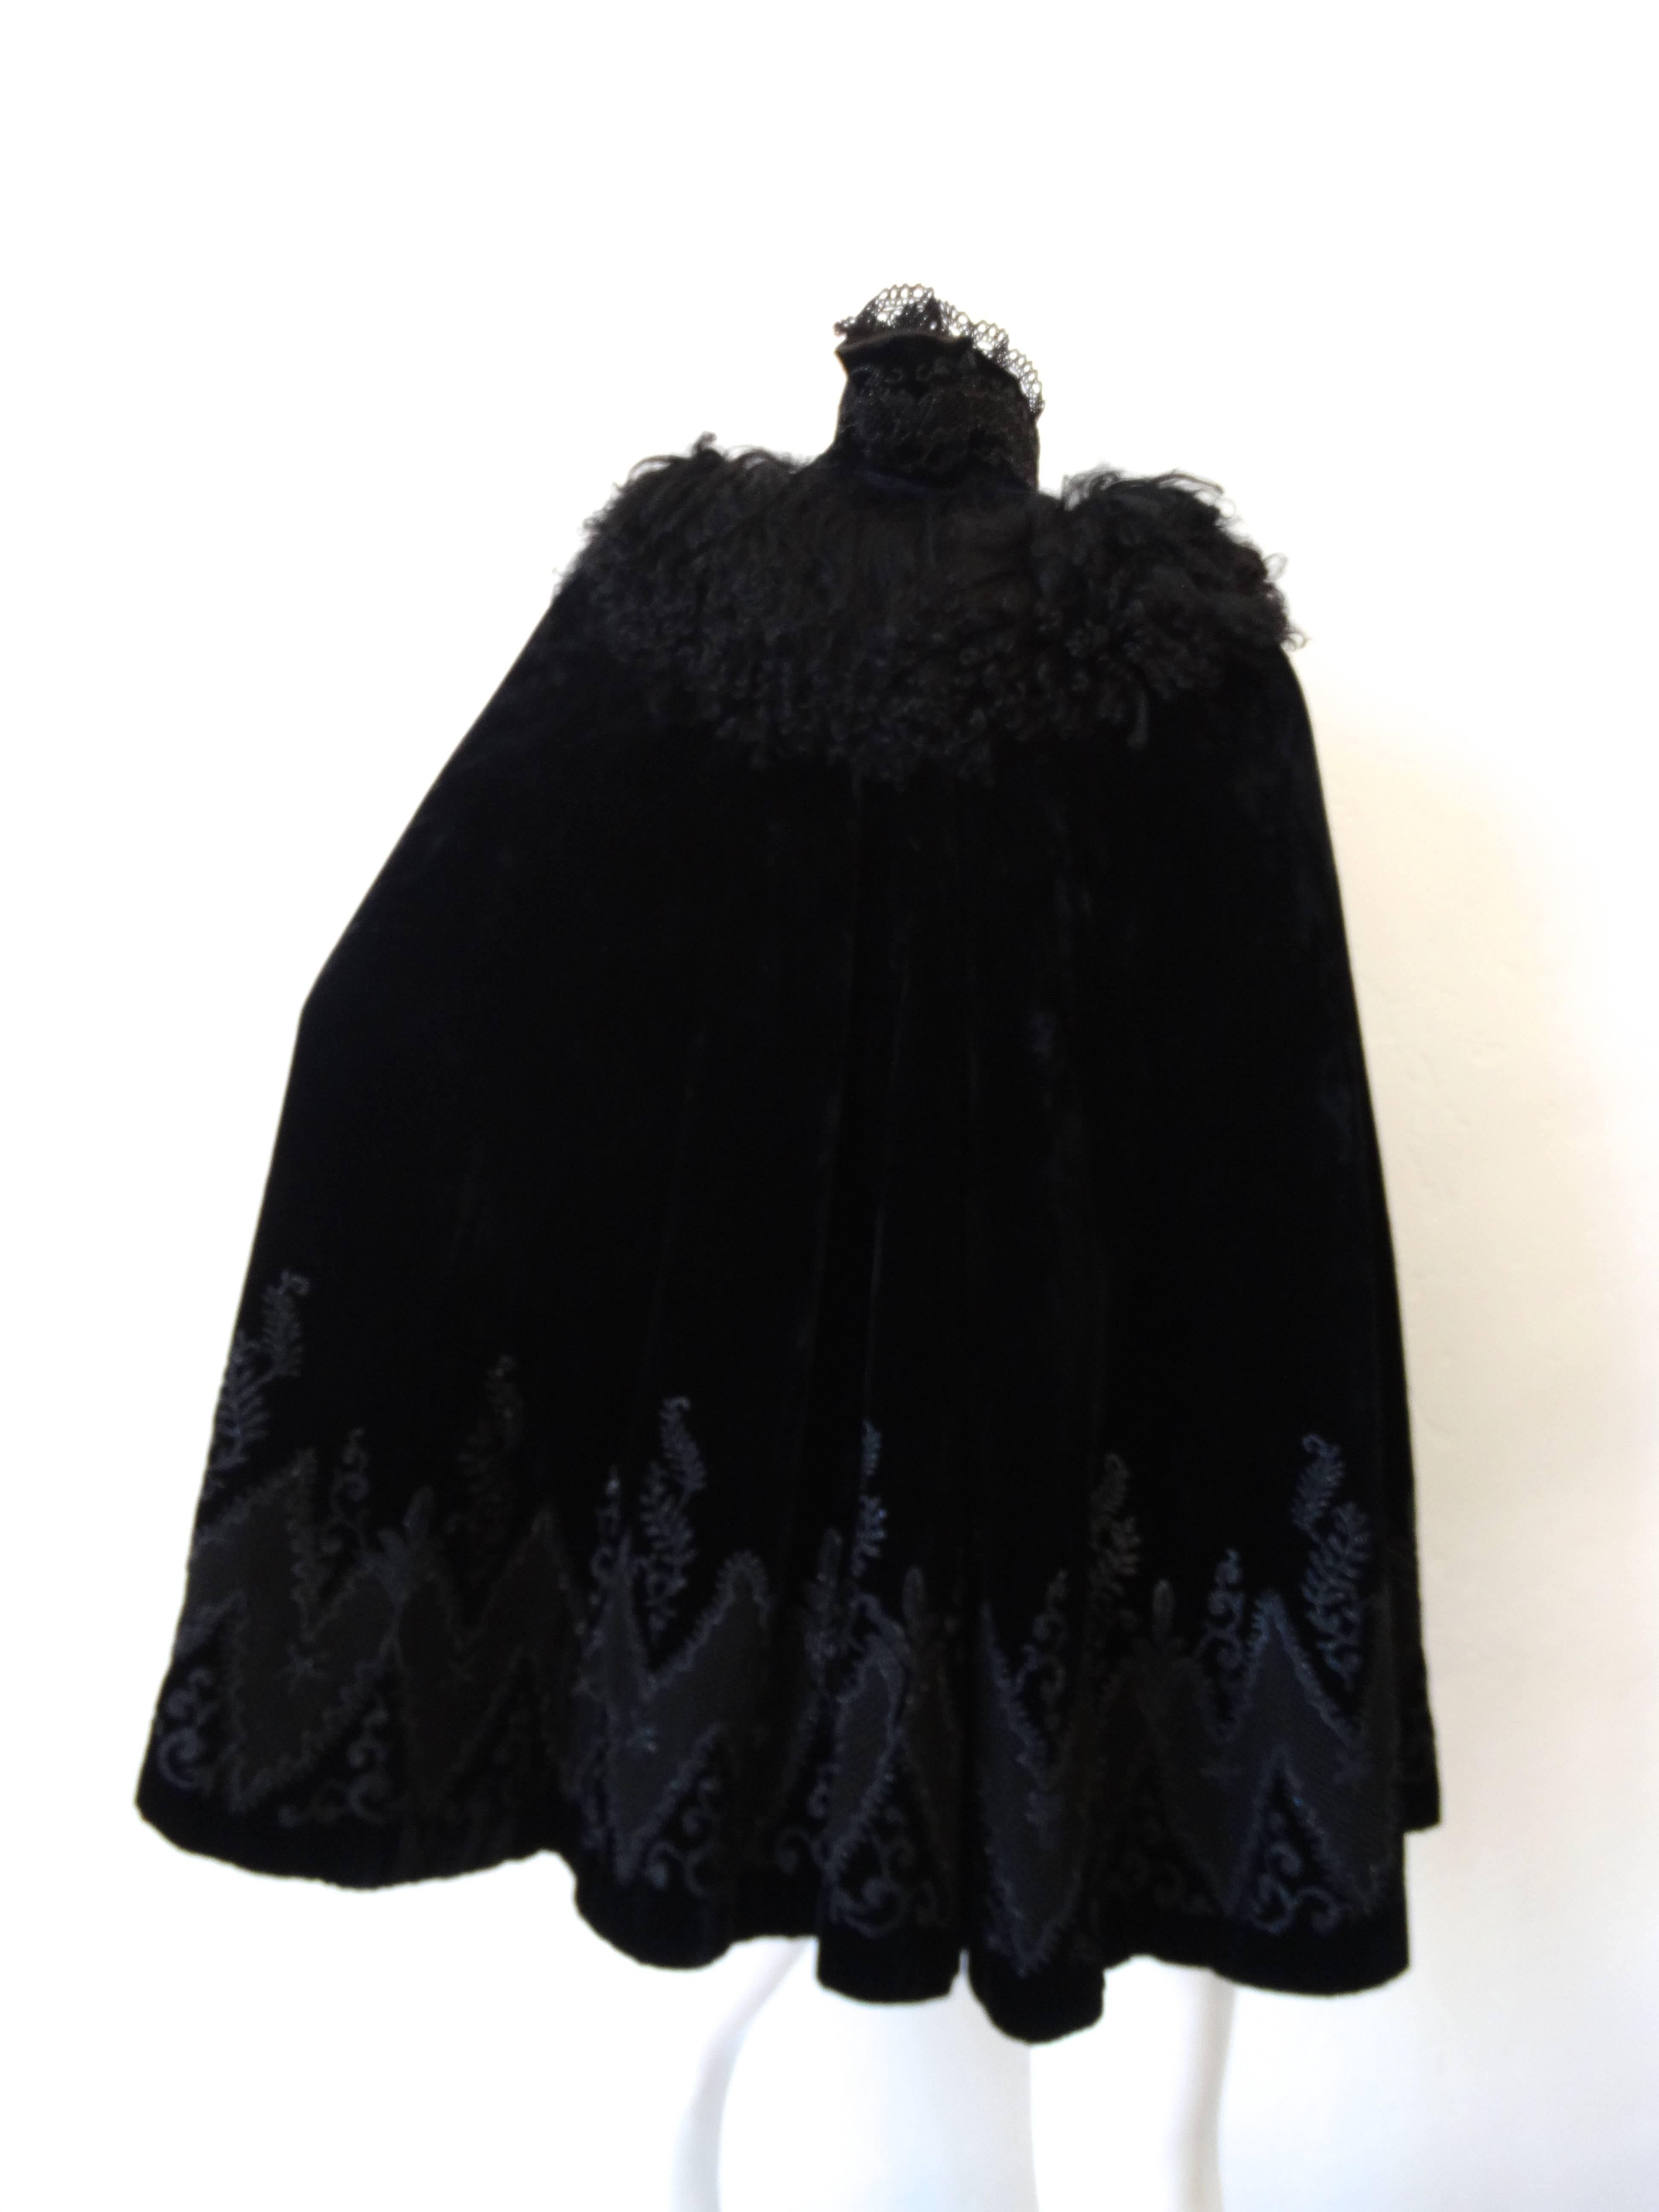 It doesn't get any more Victorian than this- our incredible 1890s cape from Parisian designer B. Raffin. Made of the softest midnight black silk velvet. Accented with super intricate beading and embroidery along the entirety of the coat. Applique